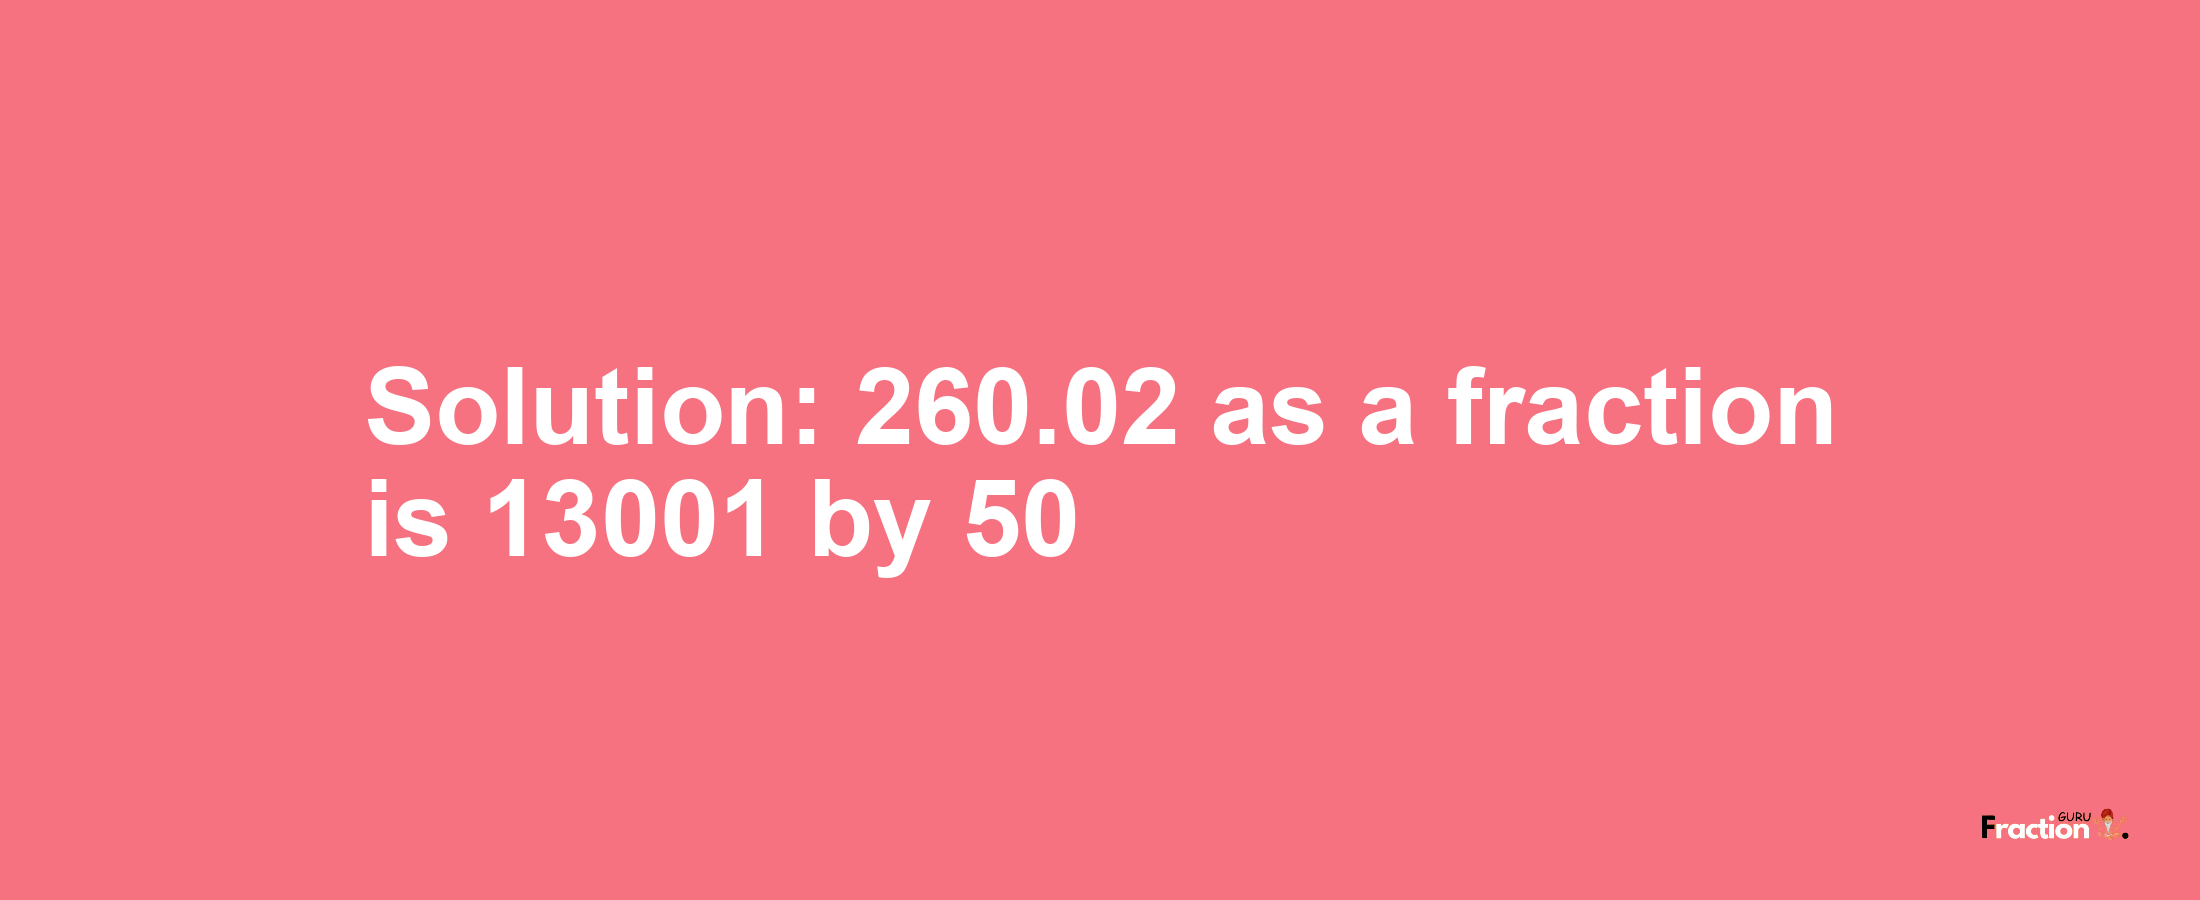 Solution:260.02 as a fraction is 13001/50